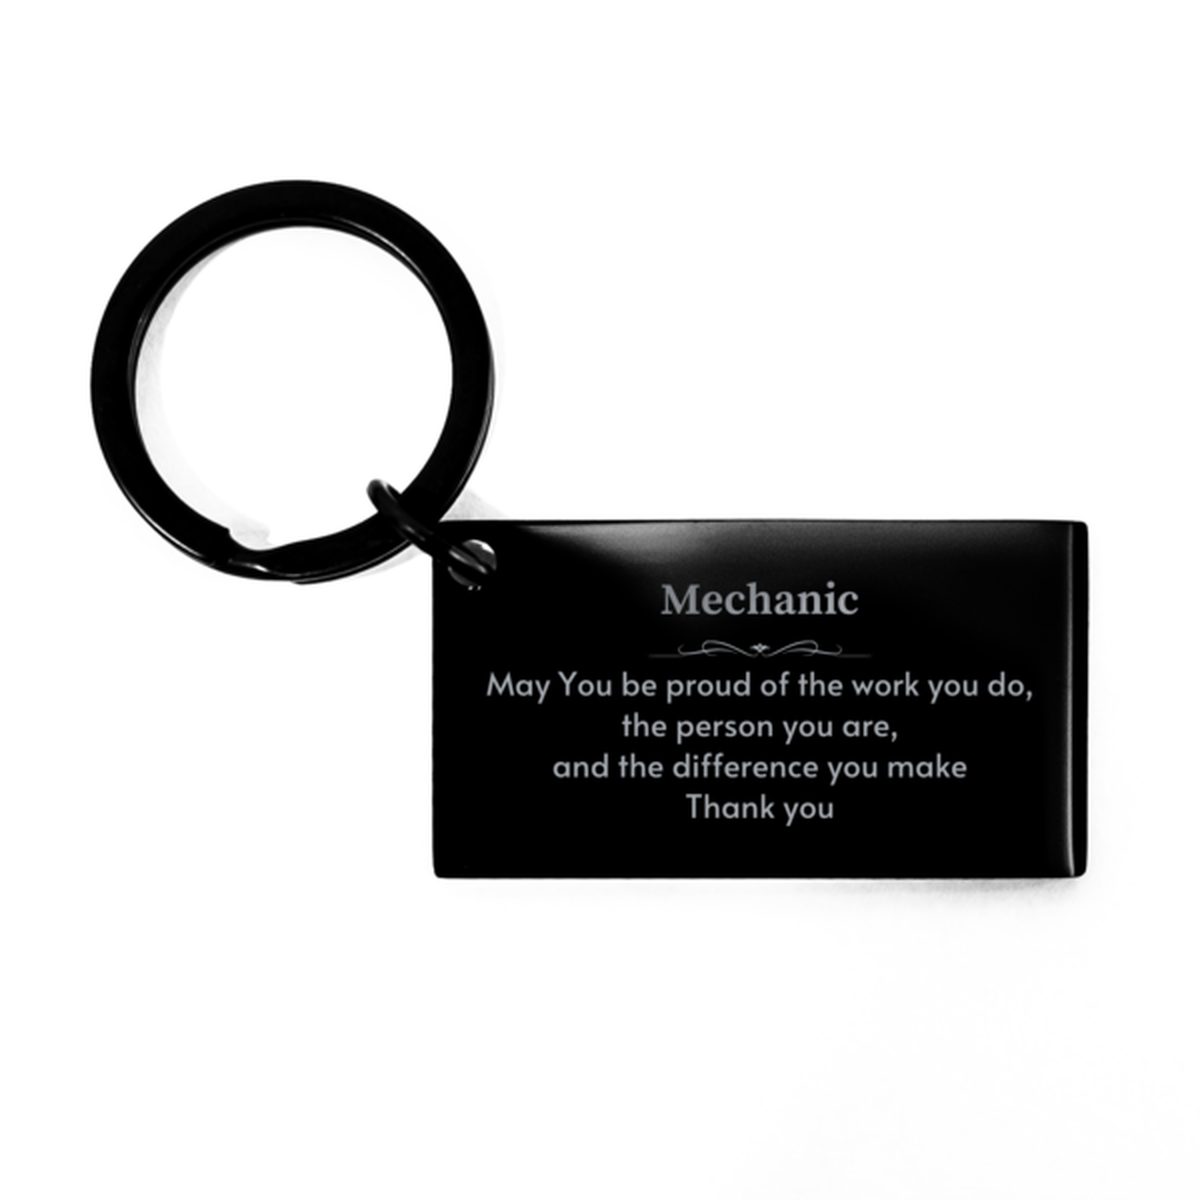 Heartwarming Keychain Retirement Coworkers Gifts for Mechanic, Oncologist May You be proud of the work you do, the person you are Gifts for Boss Men Women Friends